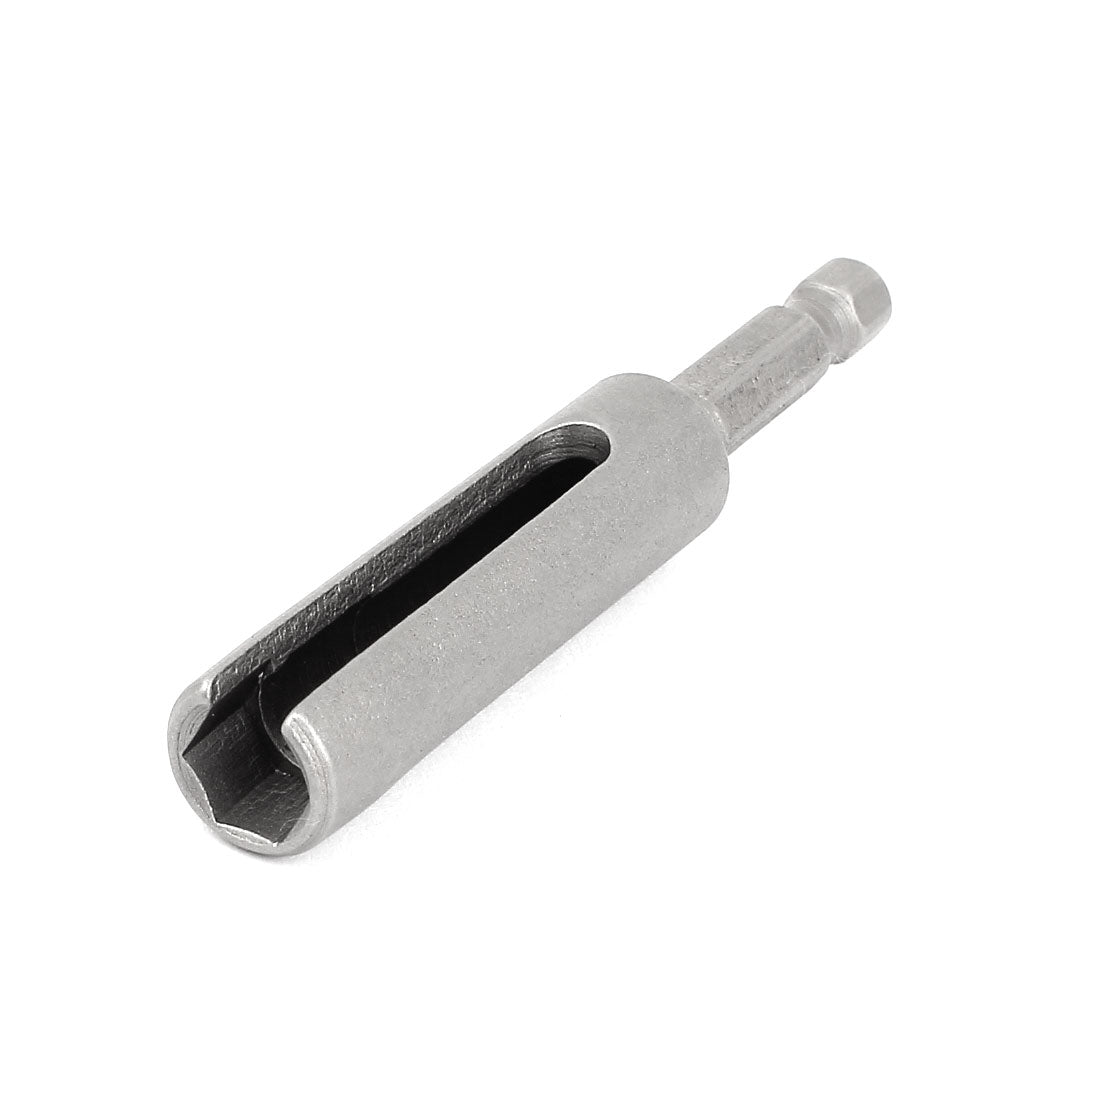 uxcell Uxcell 80mm Length 8mm Hex Nut Socket Slotted Extension Driver Bit Power Tool